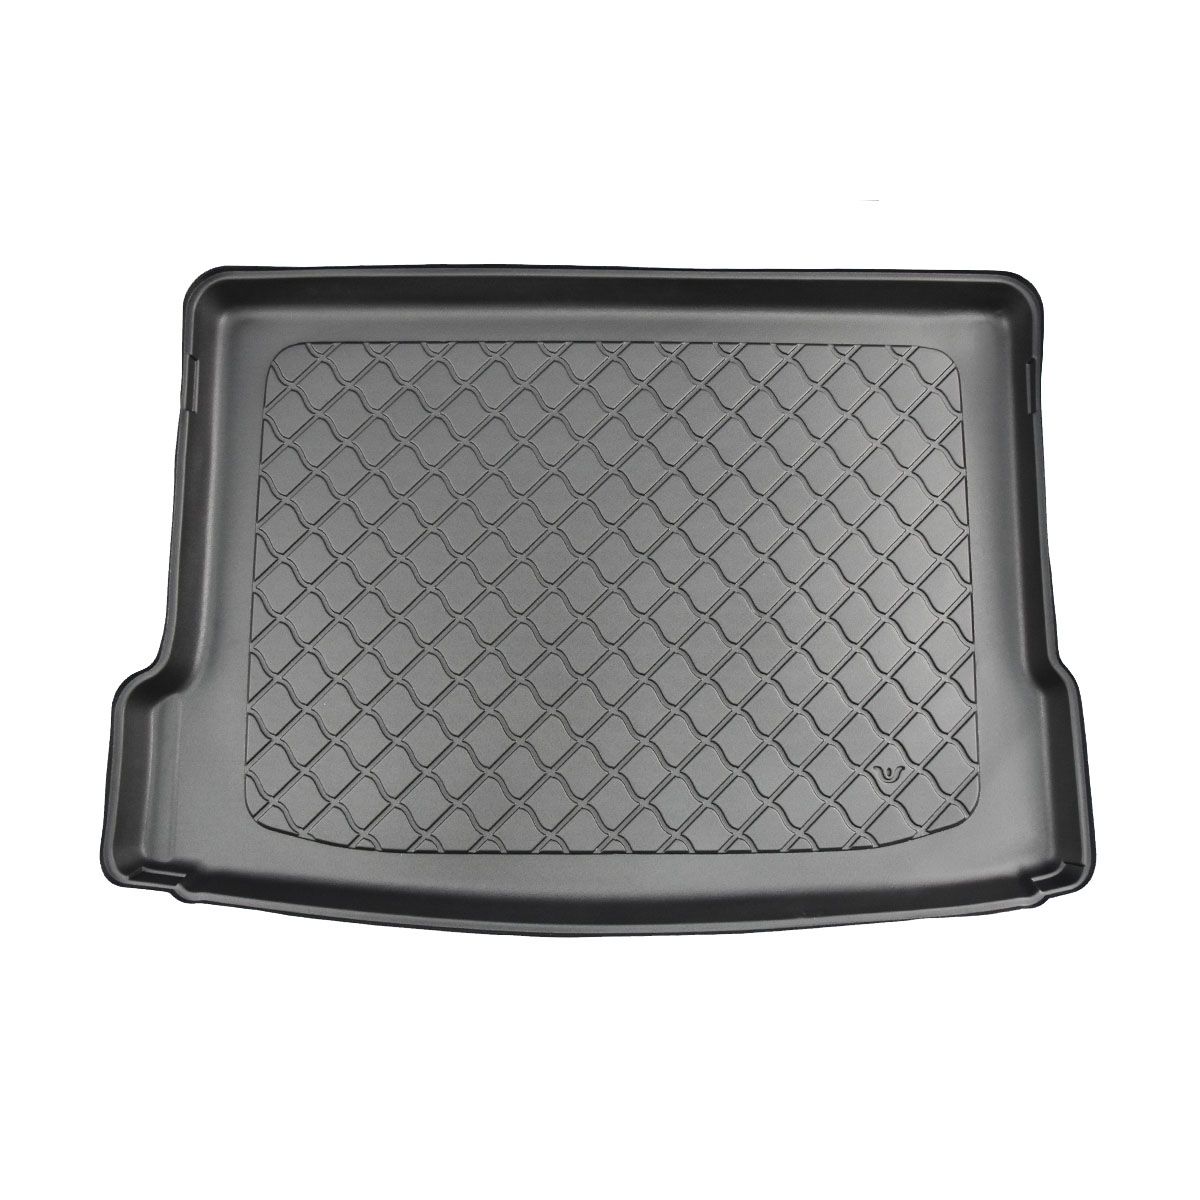 BMW X2 2018 - Onwards (F39) Moulded Boot Mat product image